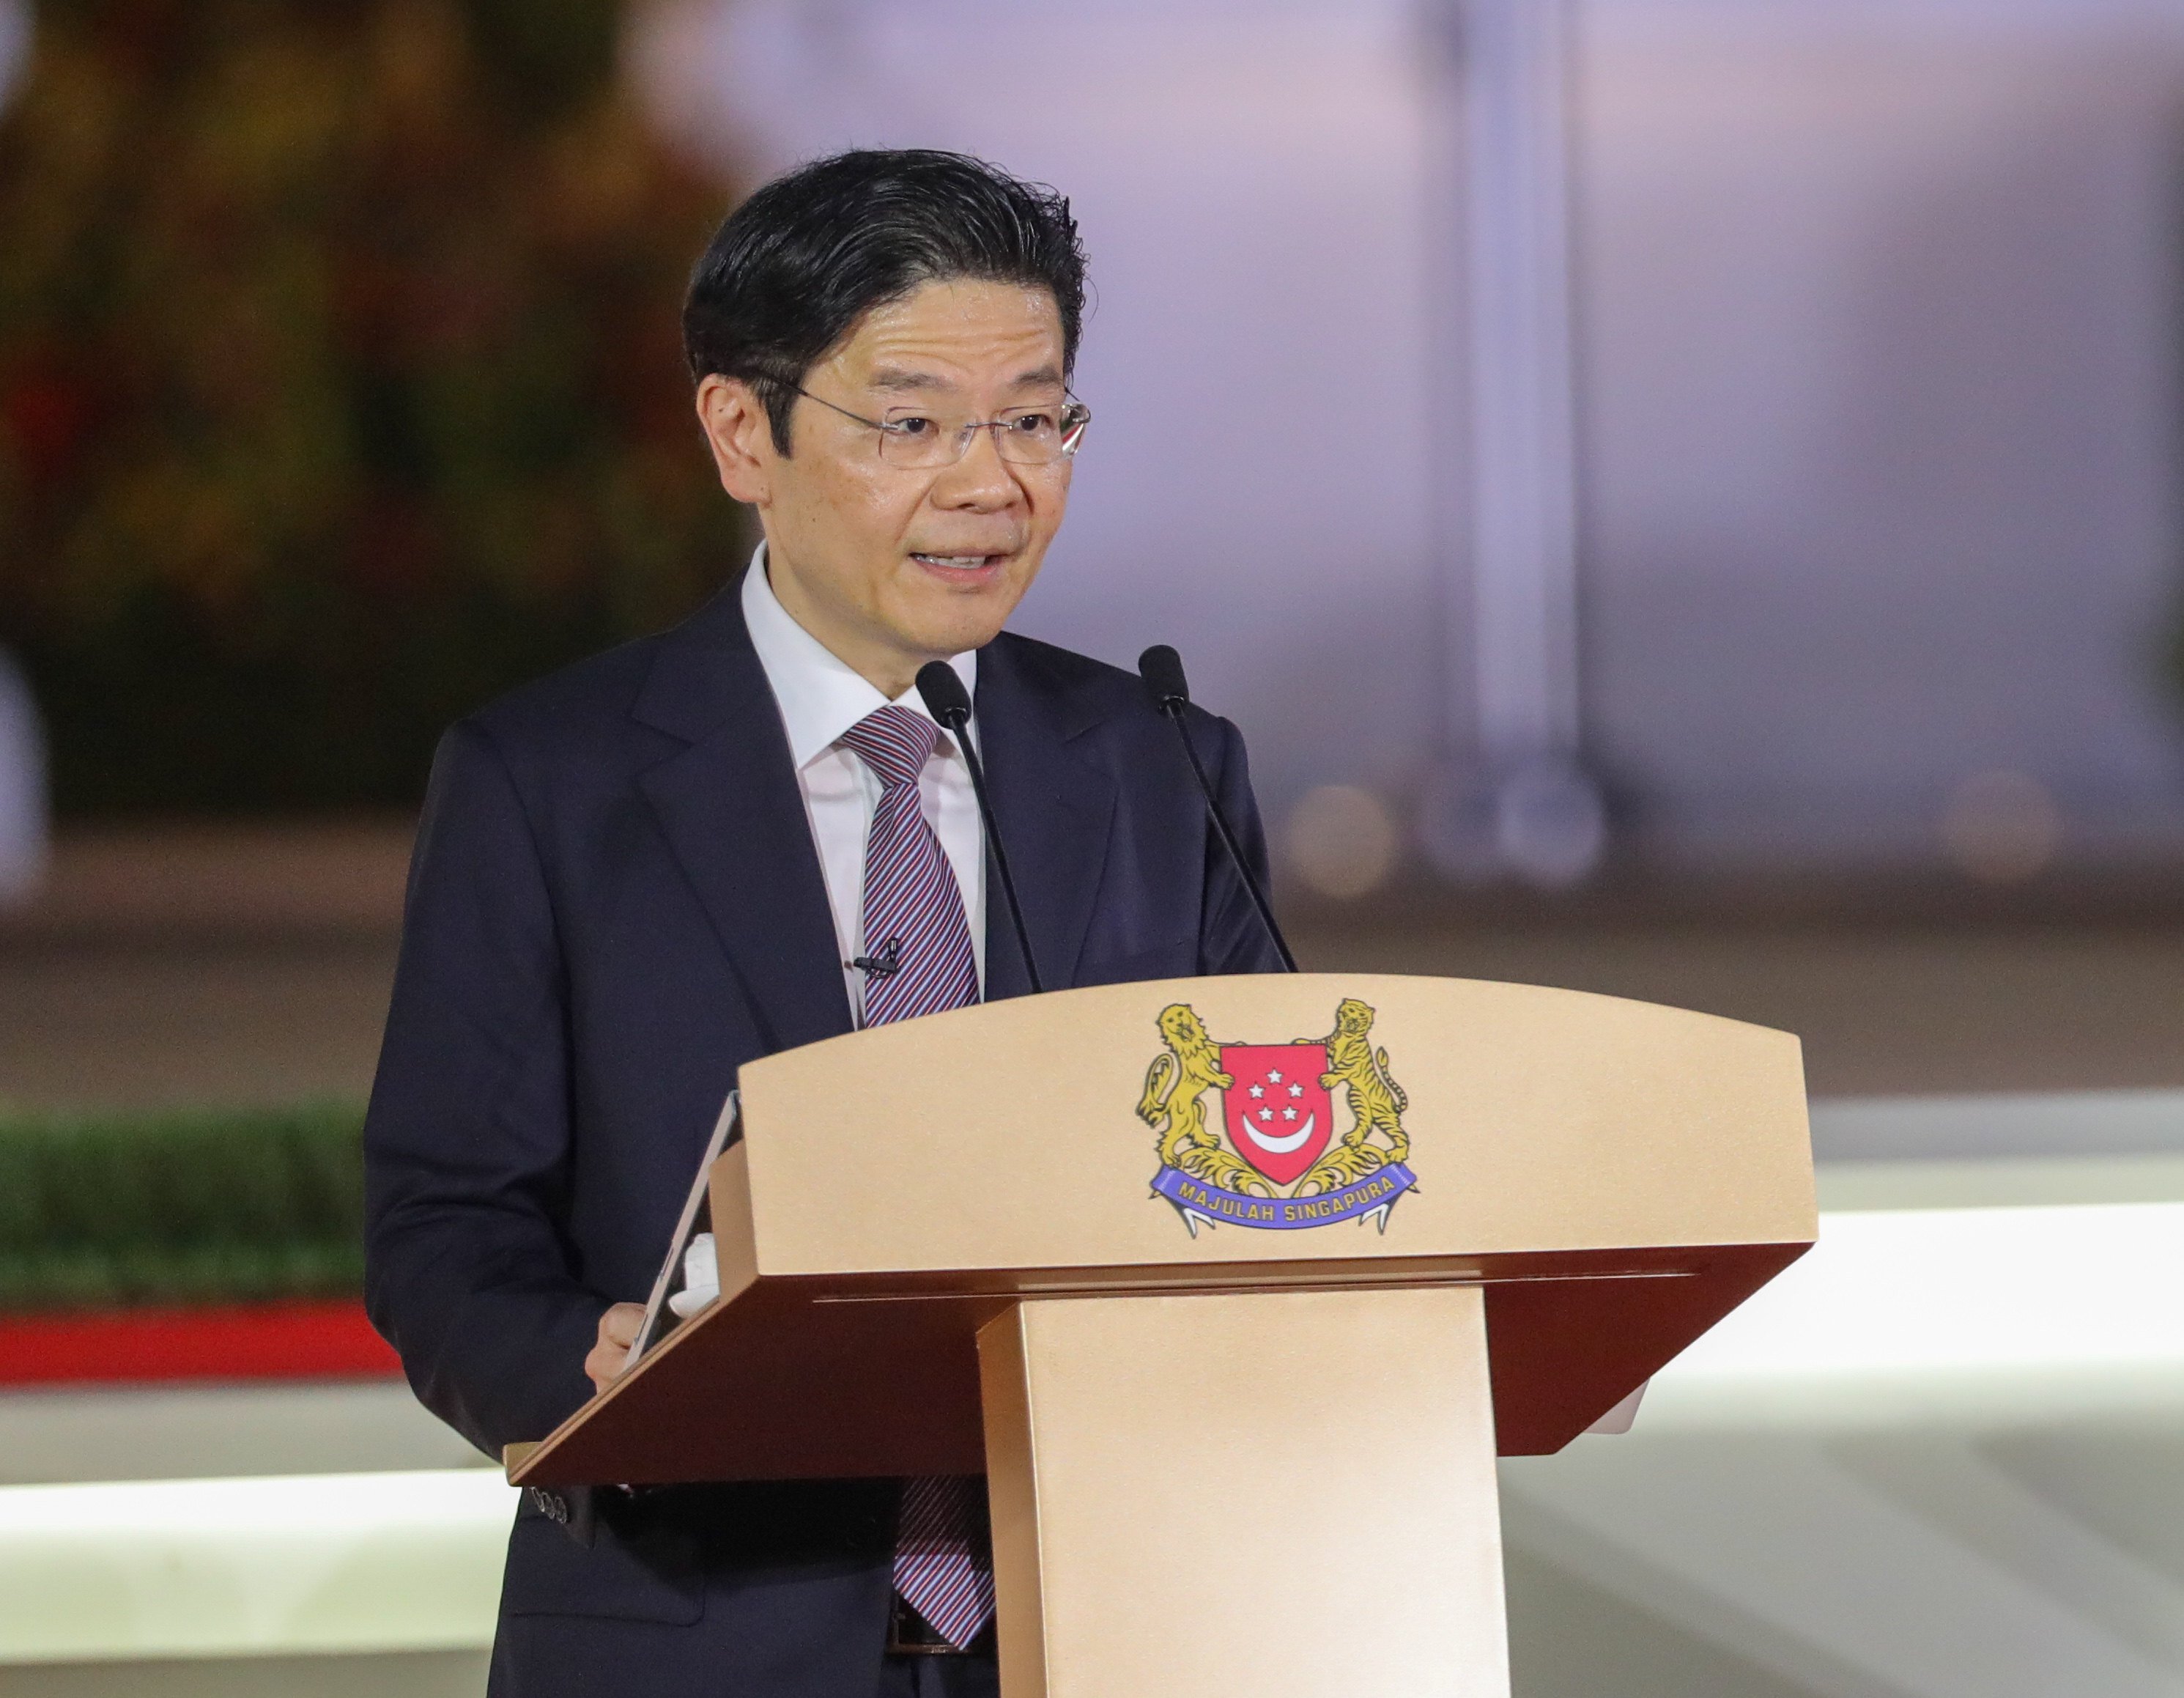 Singapore’s new Prime Minister Lawrence Wong speaks during a swearing-in ceremony held at the Istana on Wednesday. Photo: Ministry of Communications and Information of Singapore/Handout via Xinhua